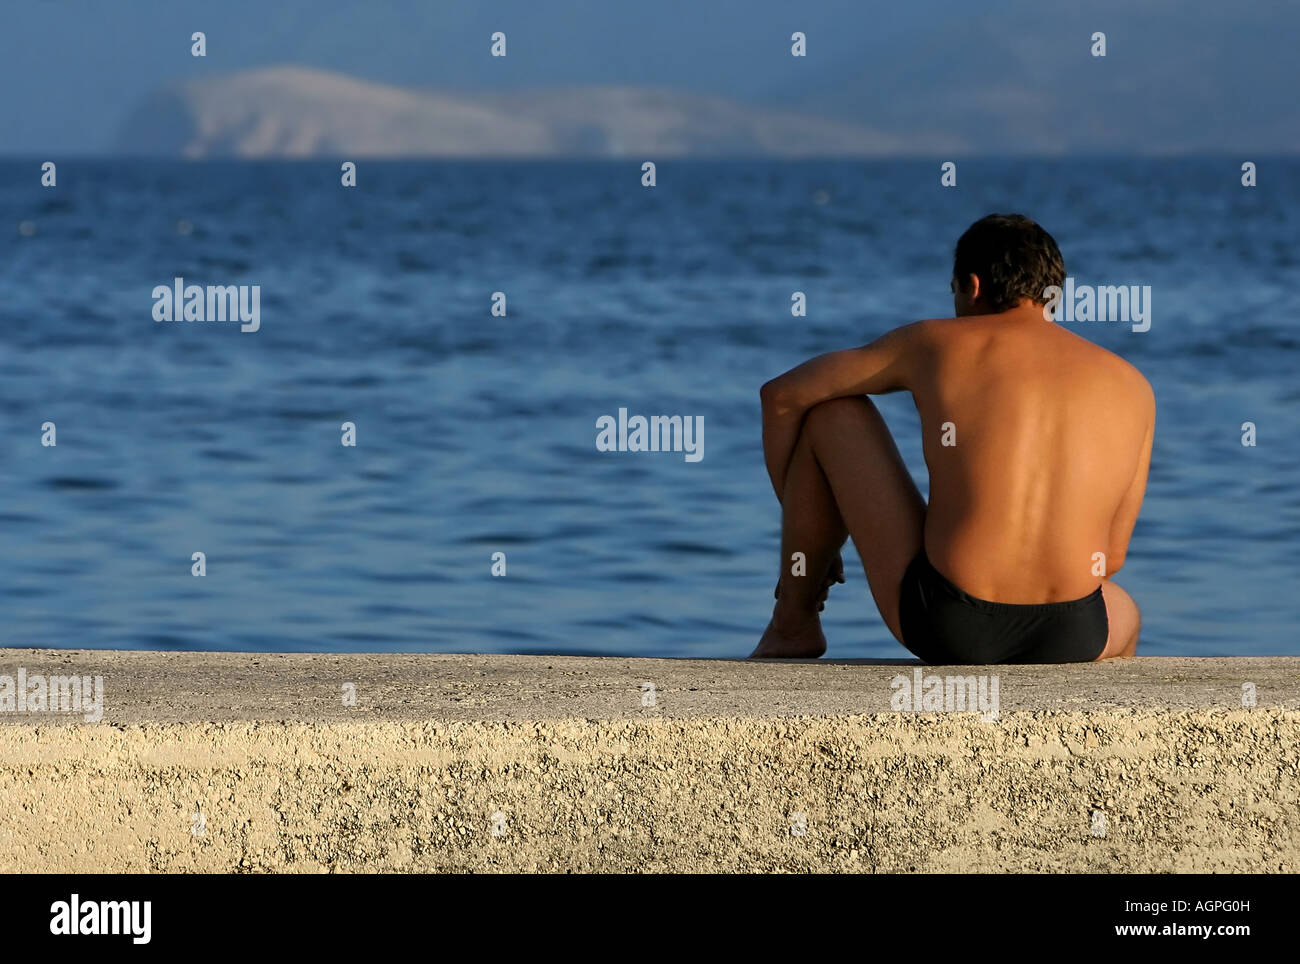 a man in bathing trunks sitting on a wall at the seashore and relaxing in the late afternoon sun Stock Photo